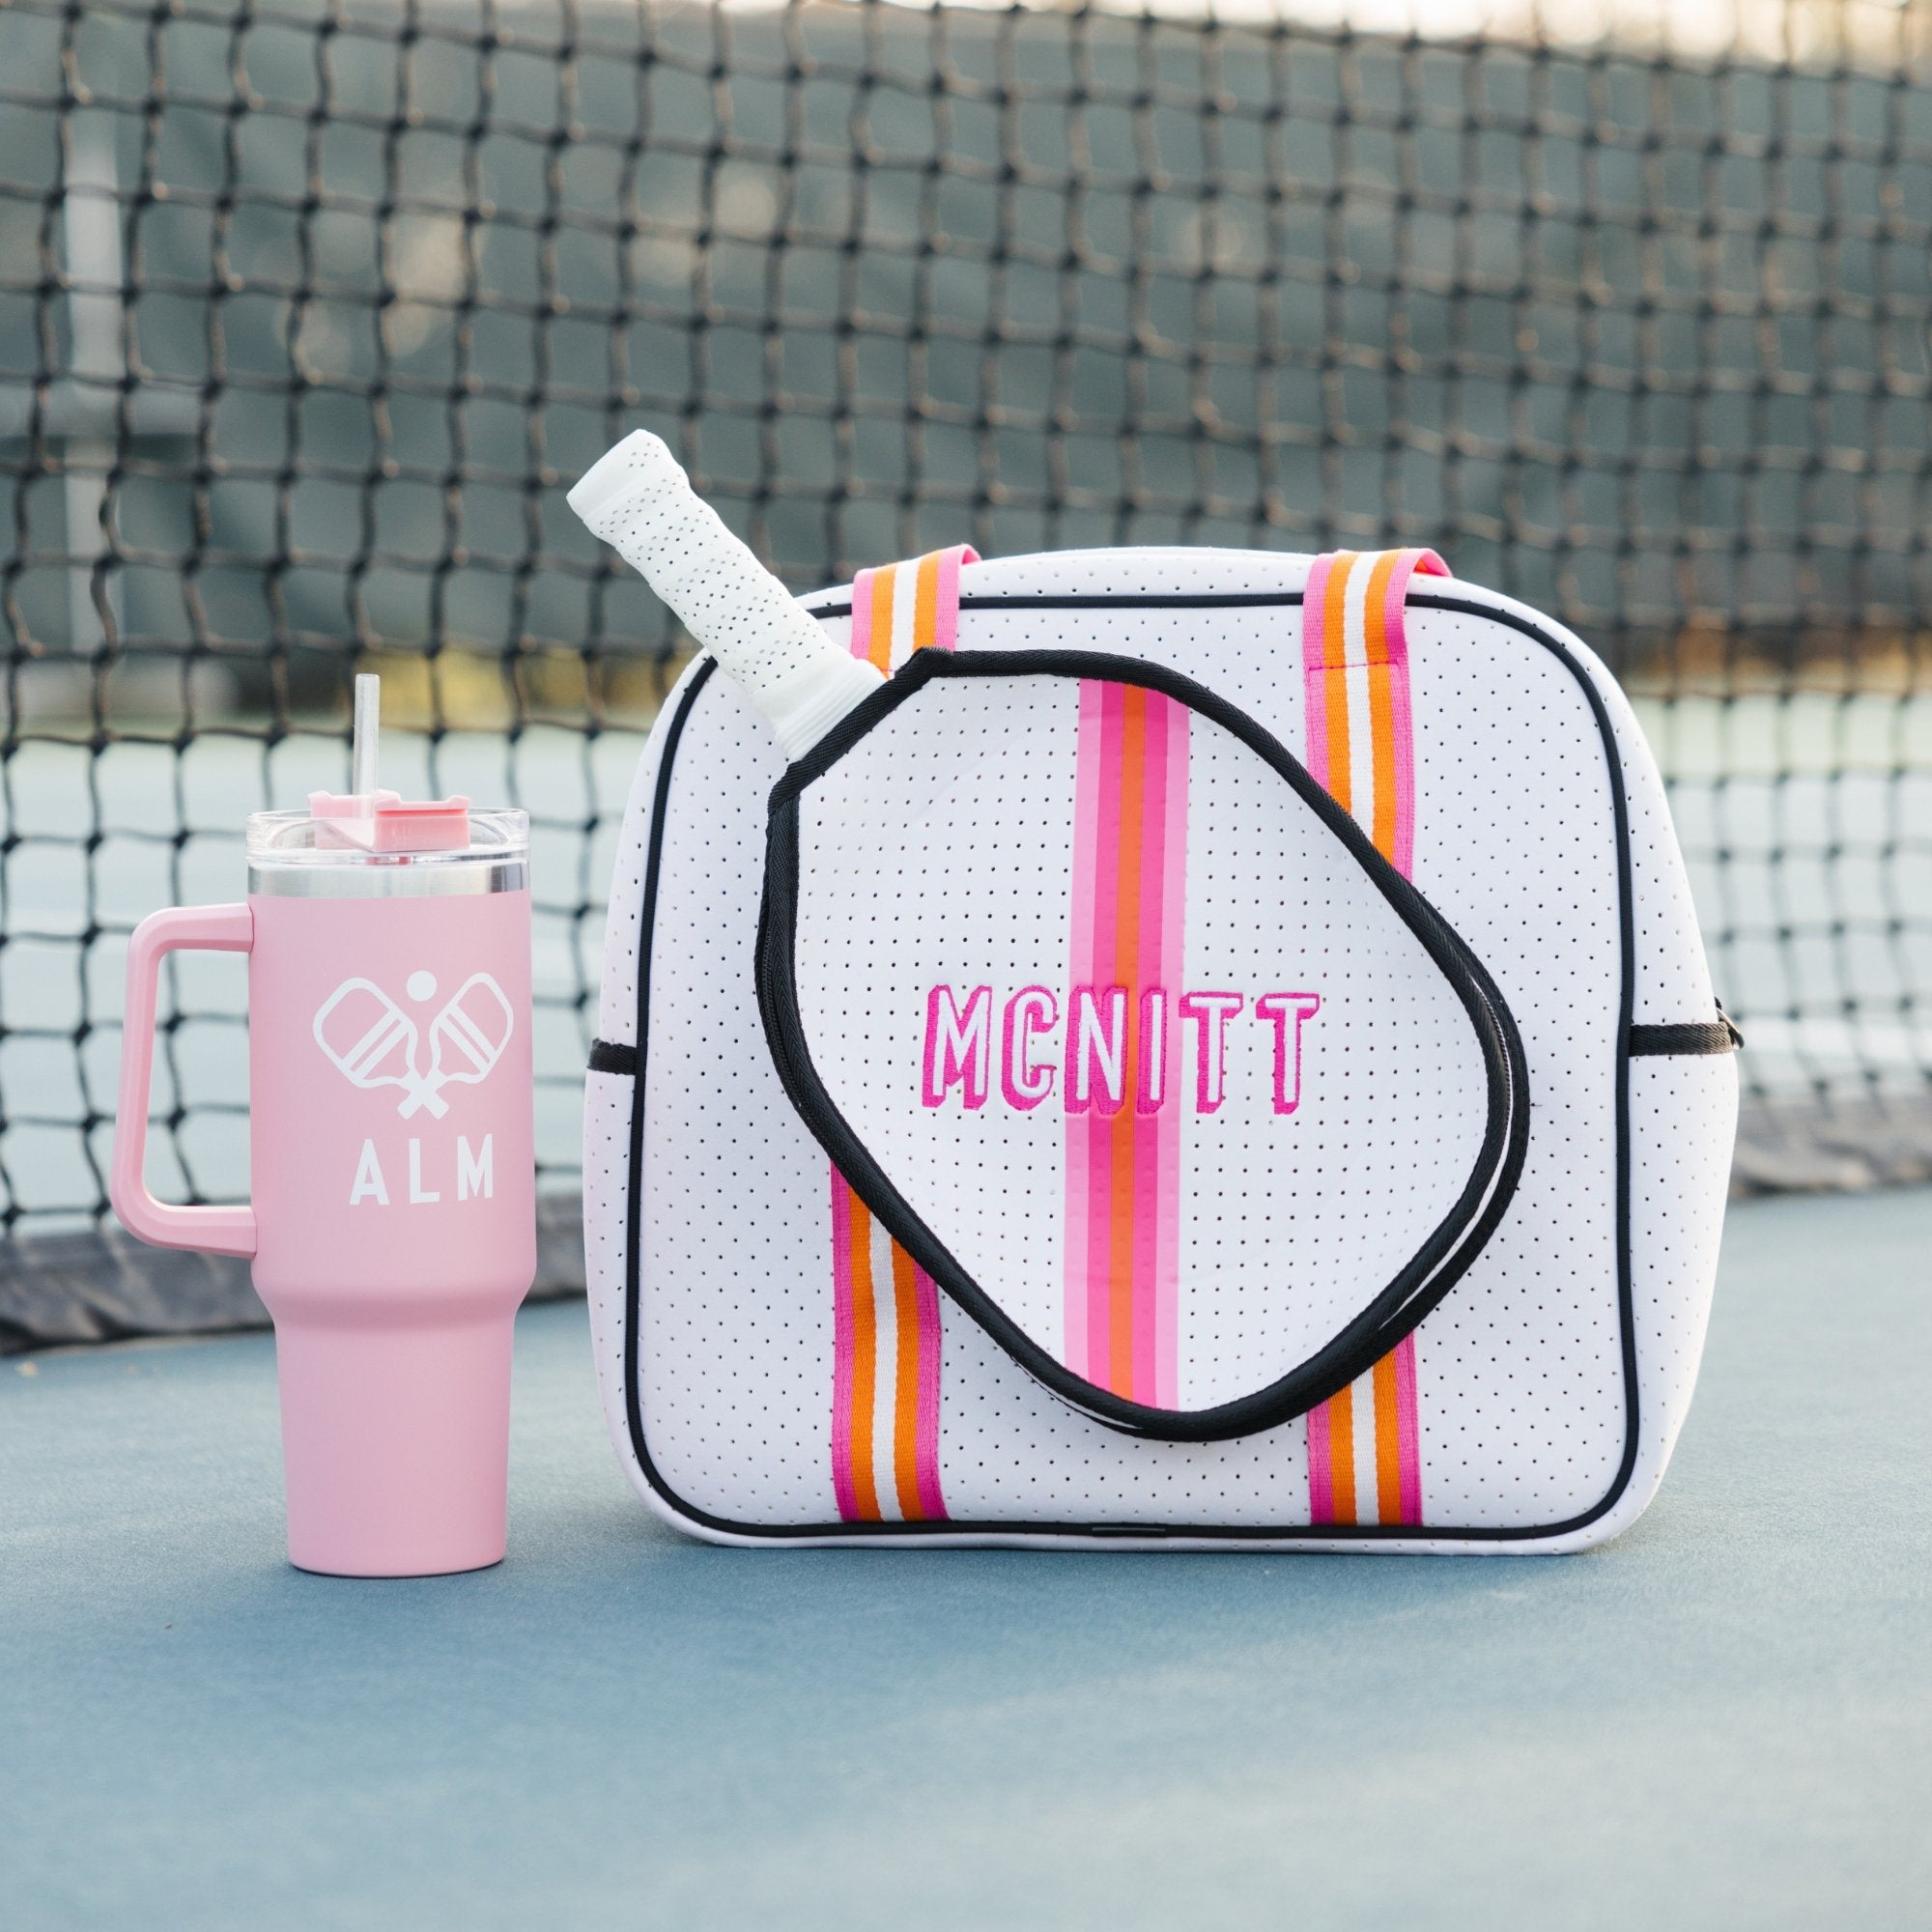 A group of pickleball bags are customized with colorful embroidered monograms and names